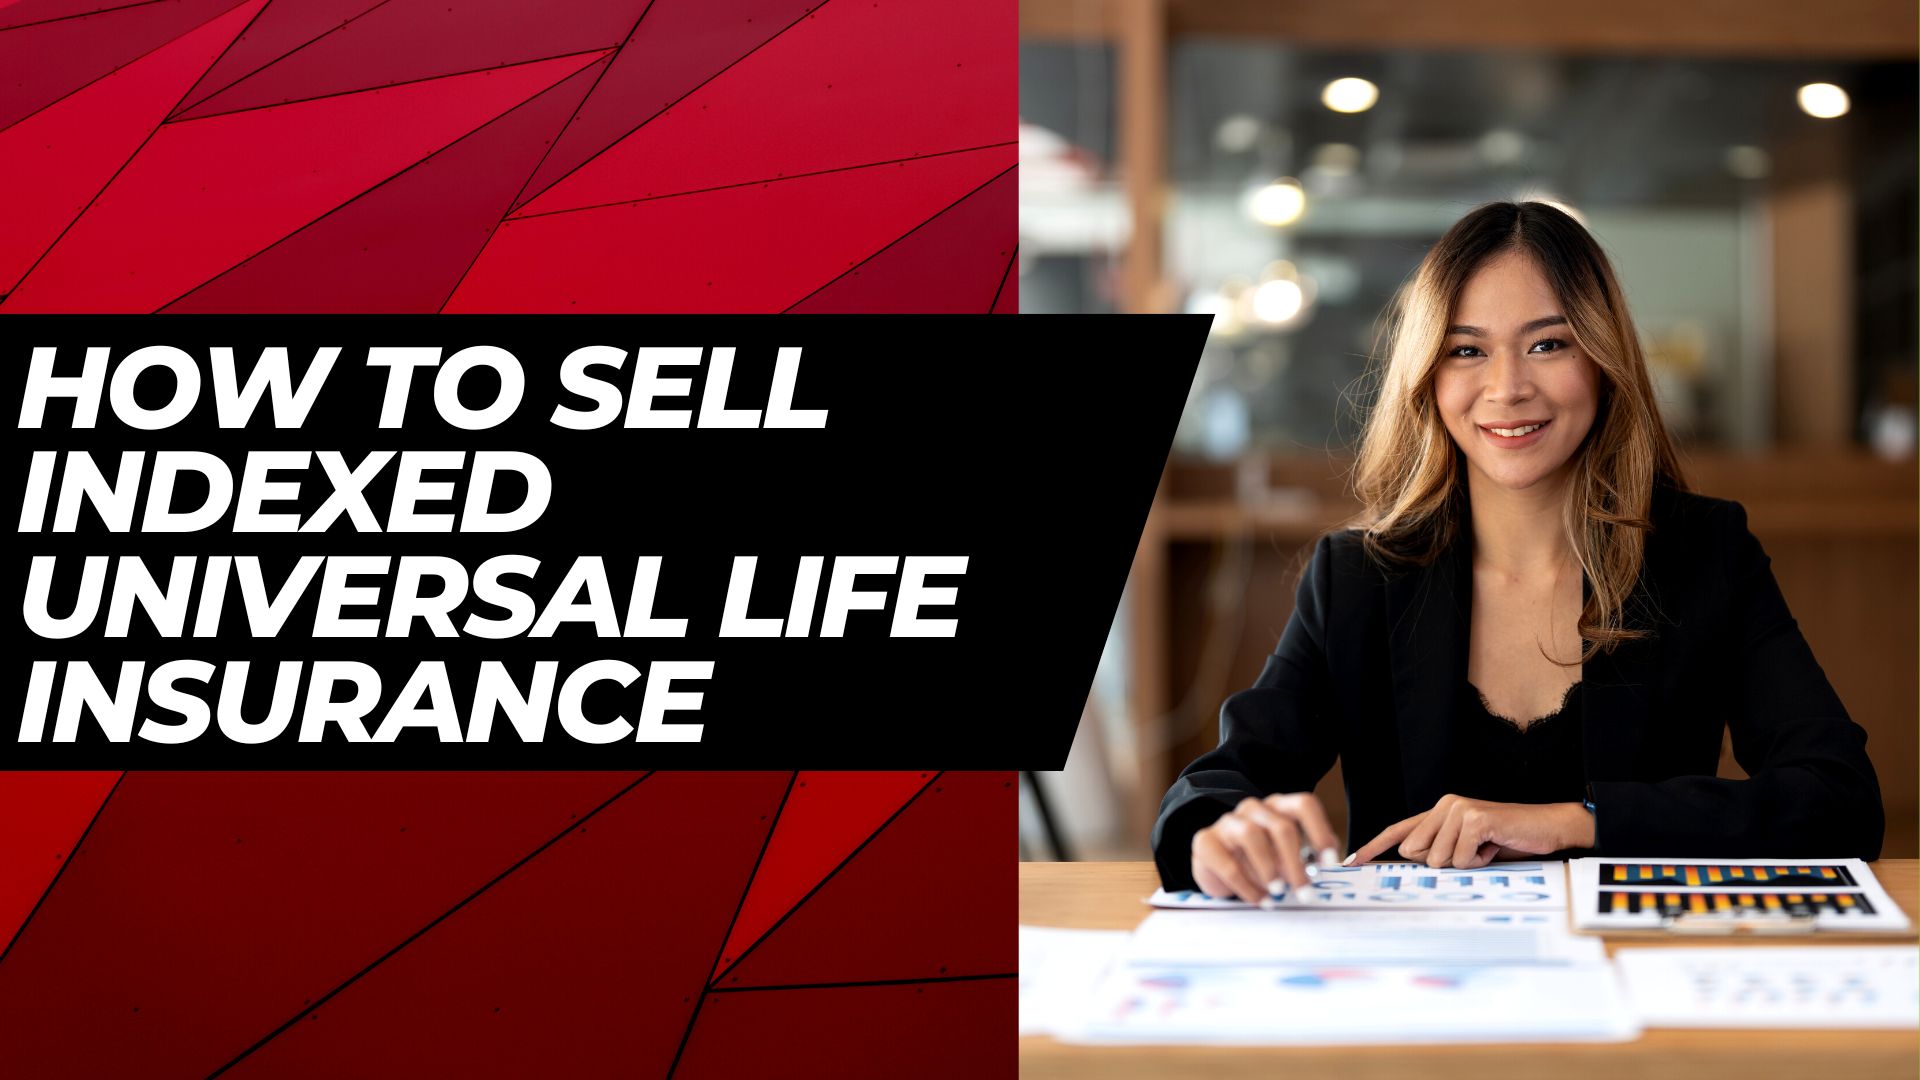 How to Sell Indexed Universal Life Insurance